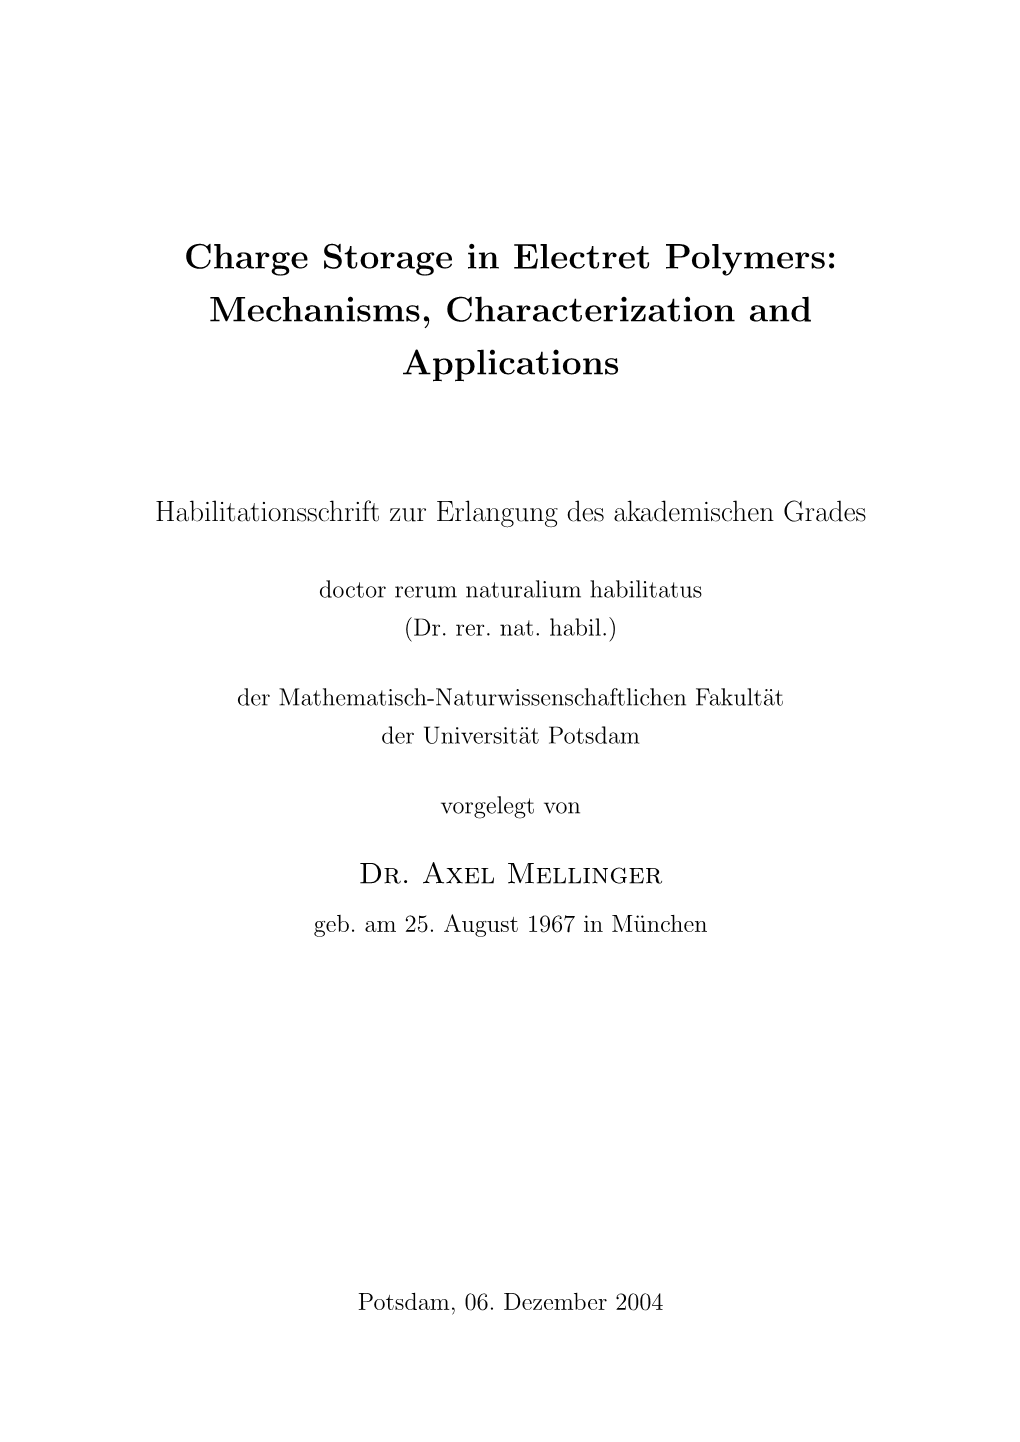 Charge Storage in Electret Polymers: Mechanisms, Characterization and Applications